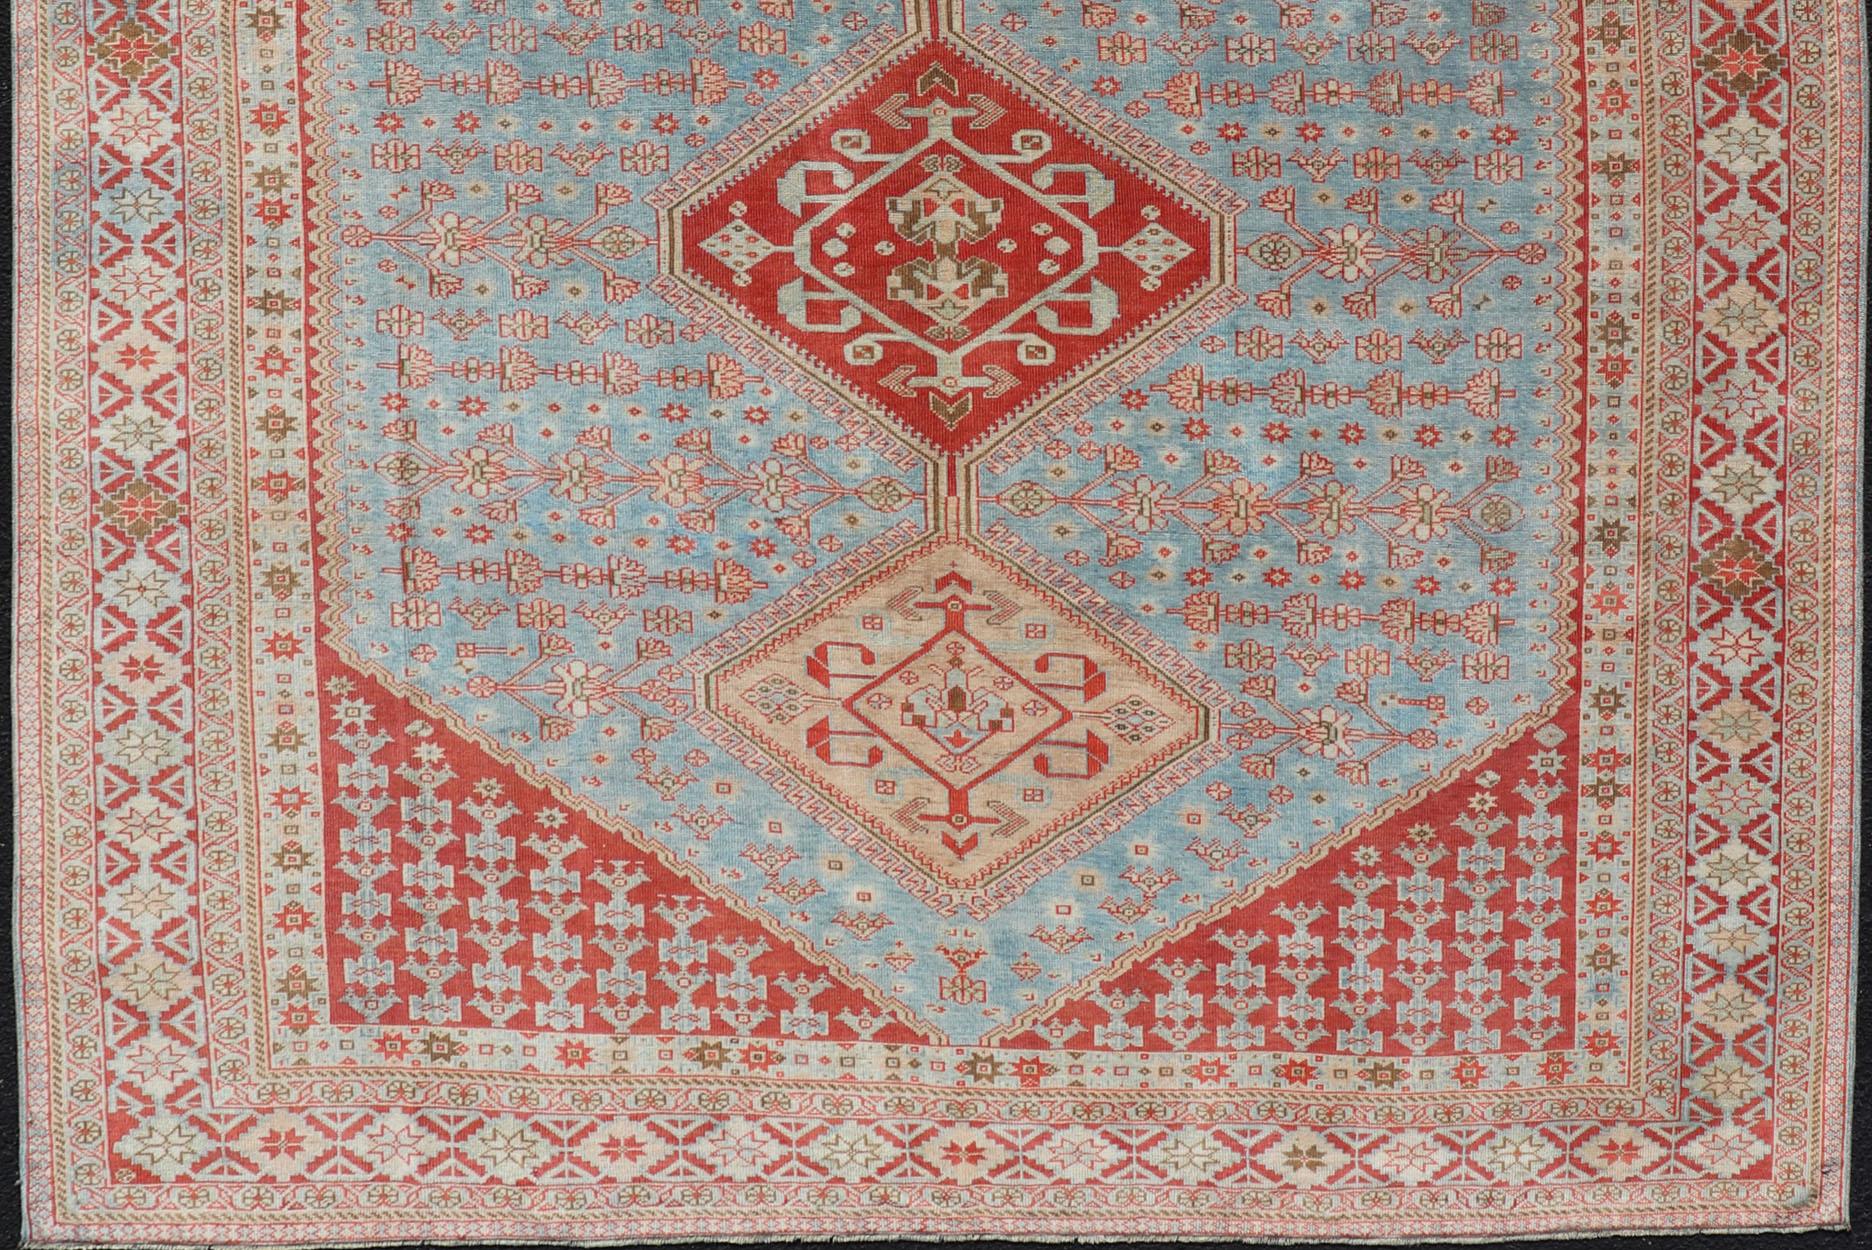 Antique Persian Qashqai Shiraz Tribal Rug with Latch Hooked Diamond Design. Keivan Woven Arts / rug EMB-9568-P13587, country of origin / type: Iran / Qashqai, circa 1910.

This antique Persian Shiraz rug has been hand-knotted in wool and features an